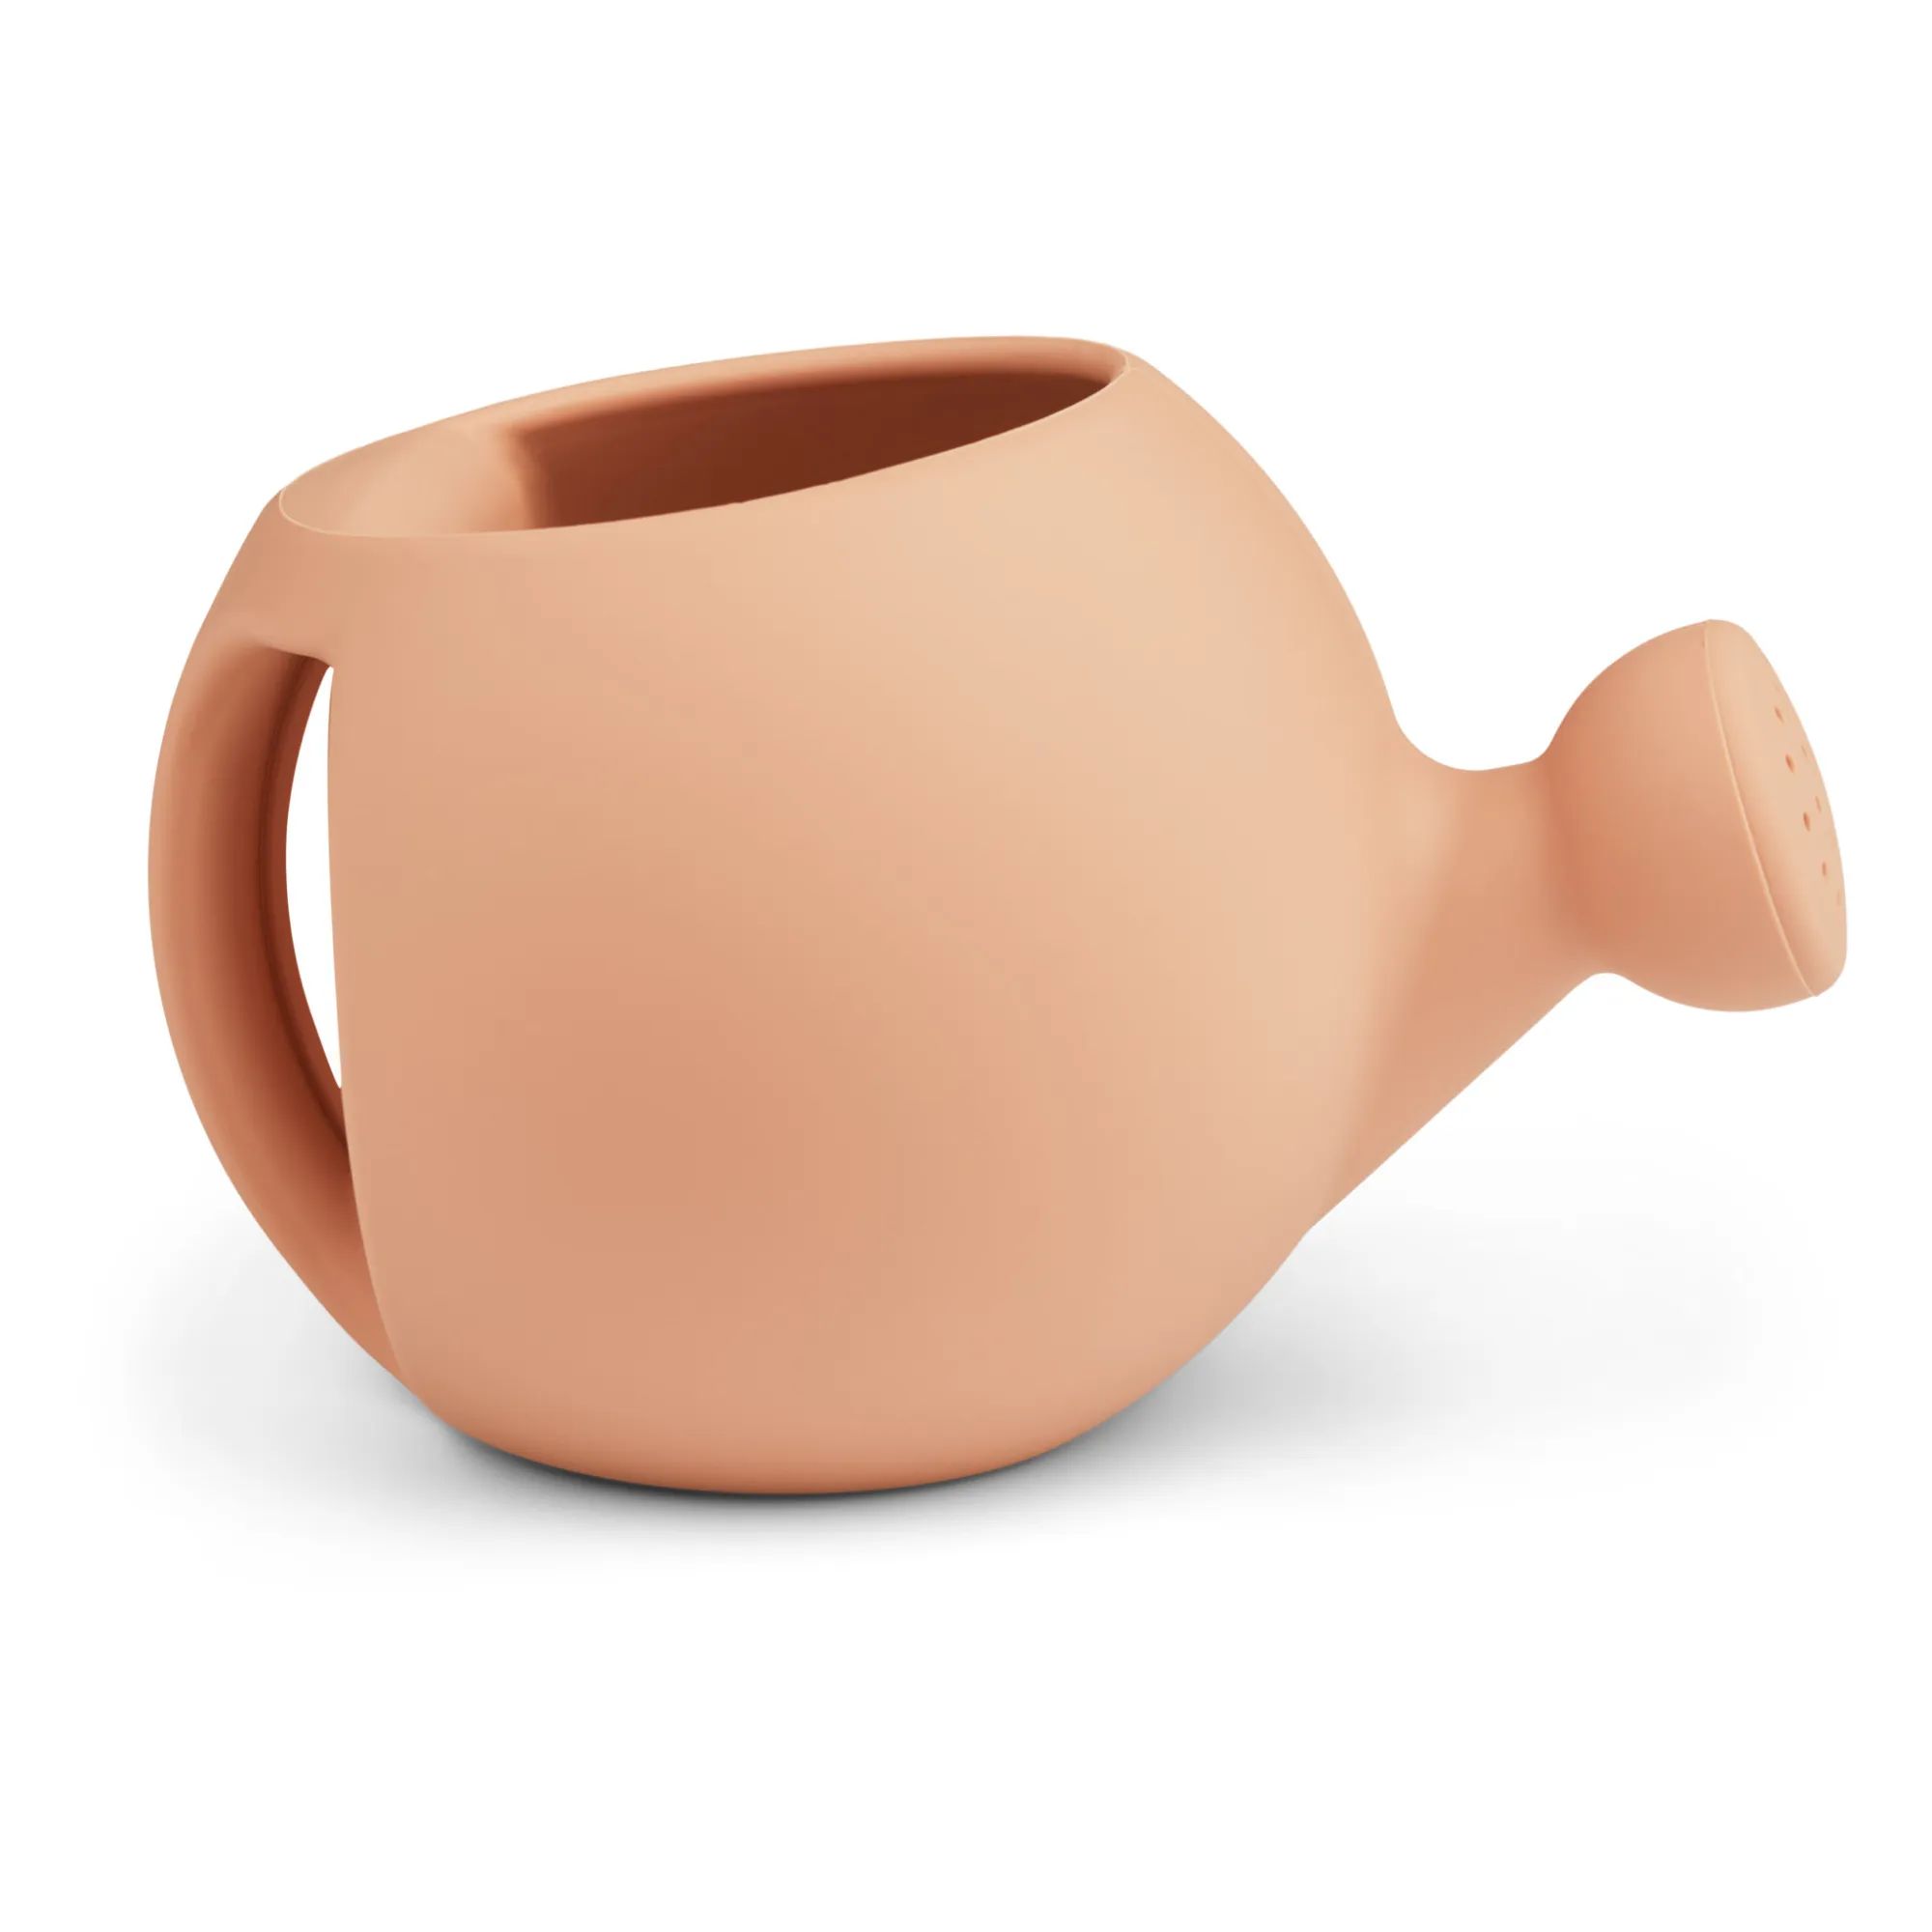 Hazel Silicone Watering Can | Tuscany rose | Smallable